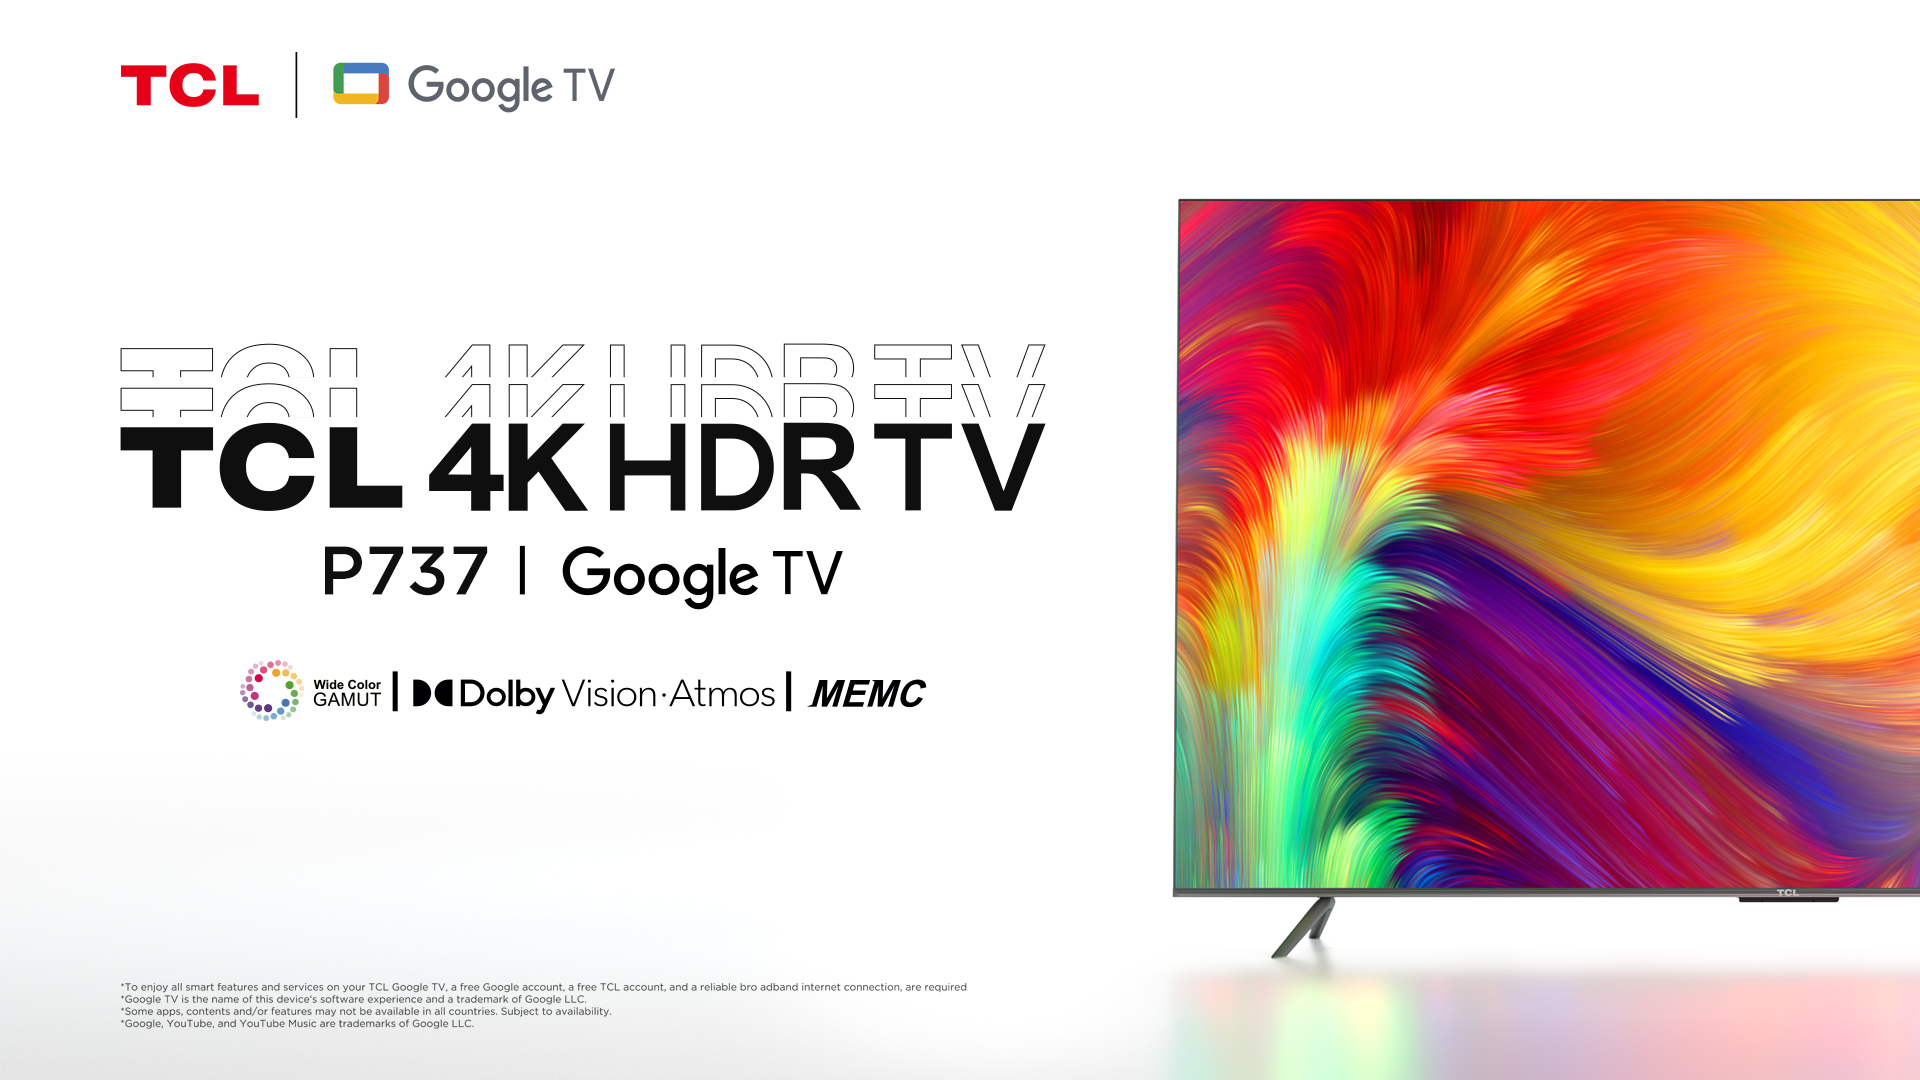 TCL c737 4K HDR TV